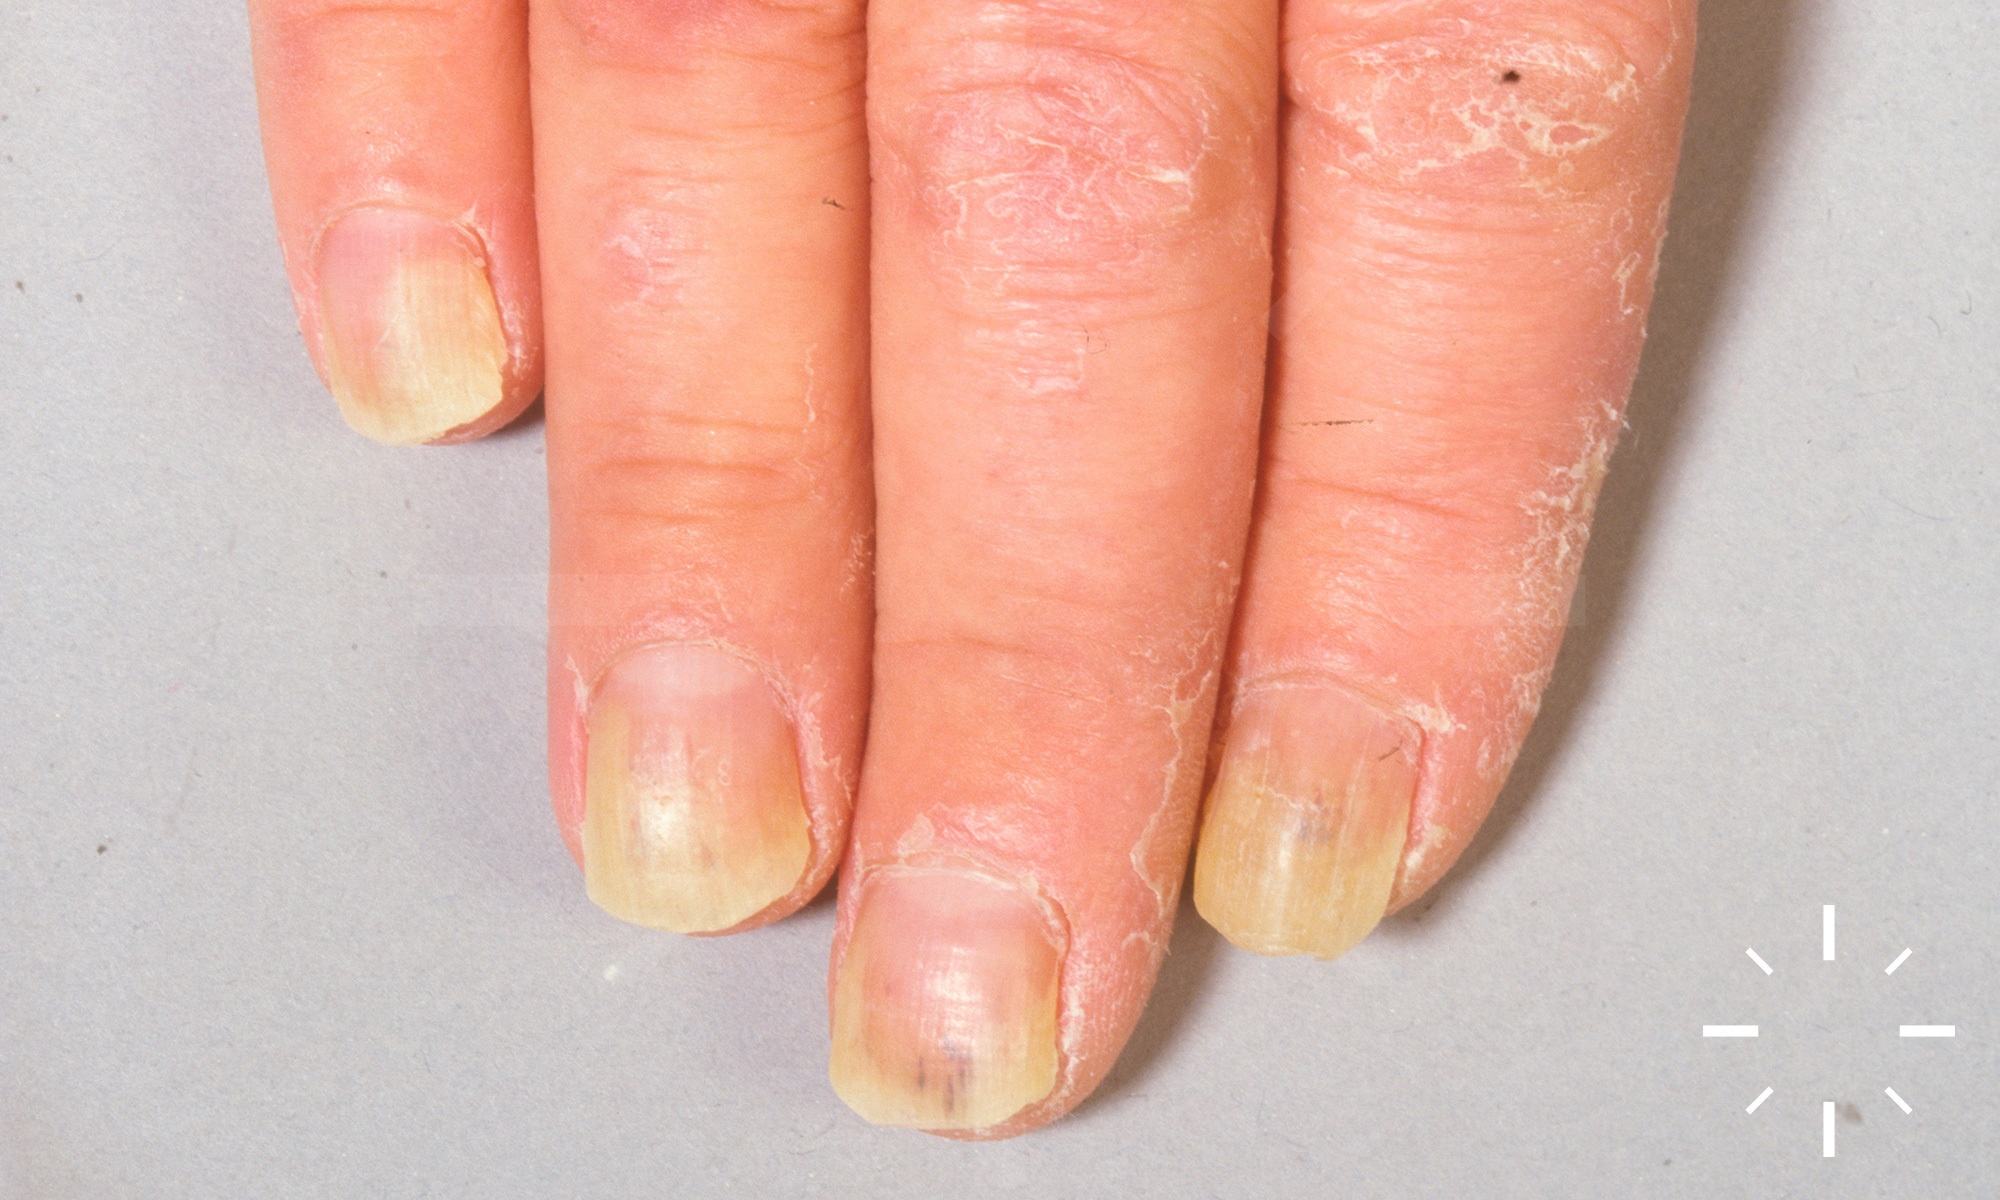 5 ways IBD can affect your nails — A Balanced Belly